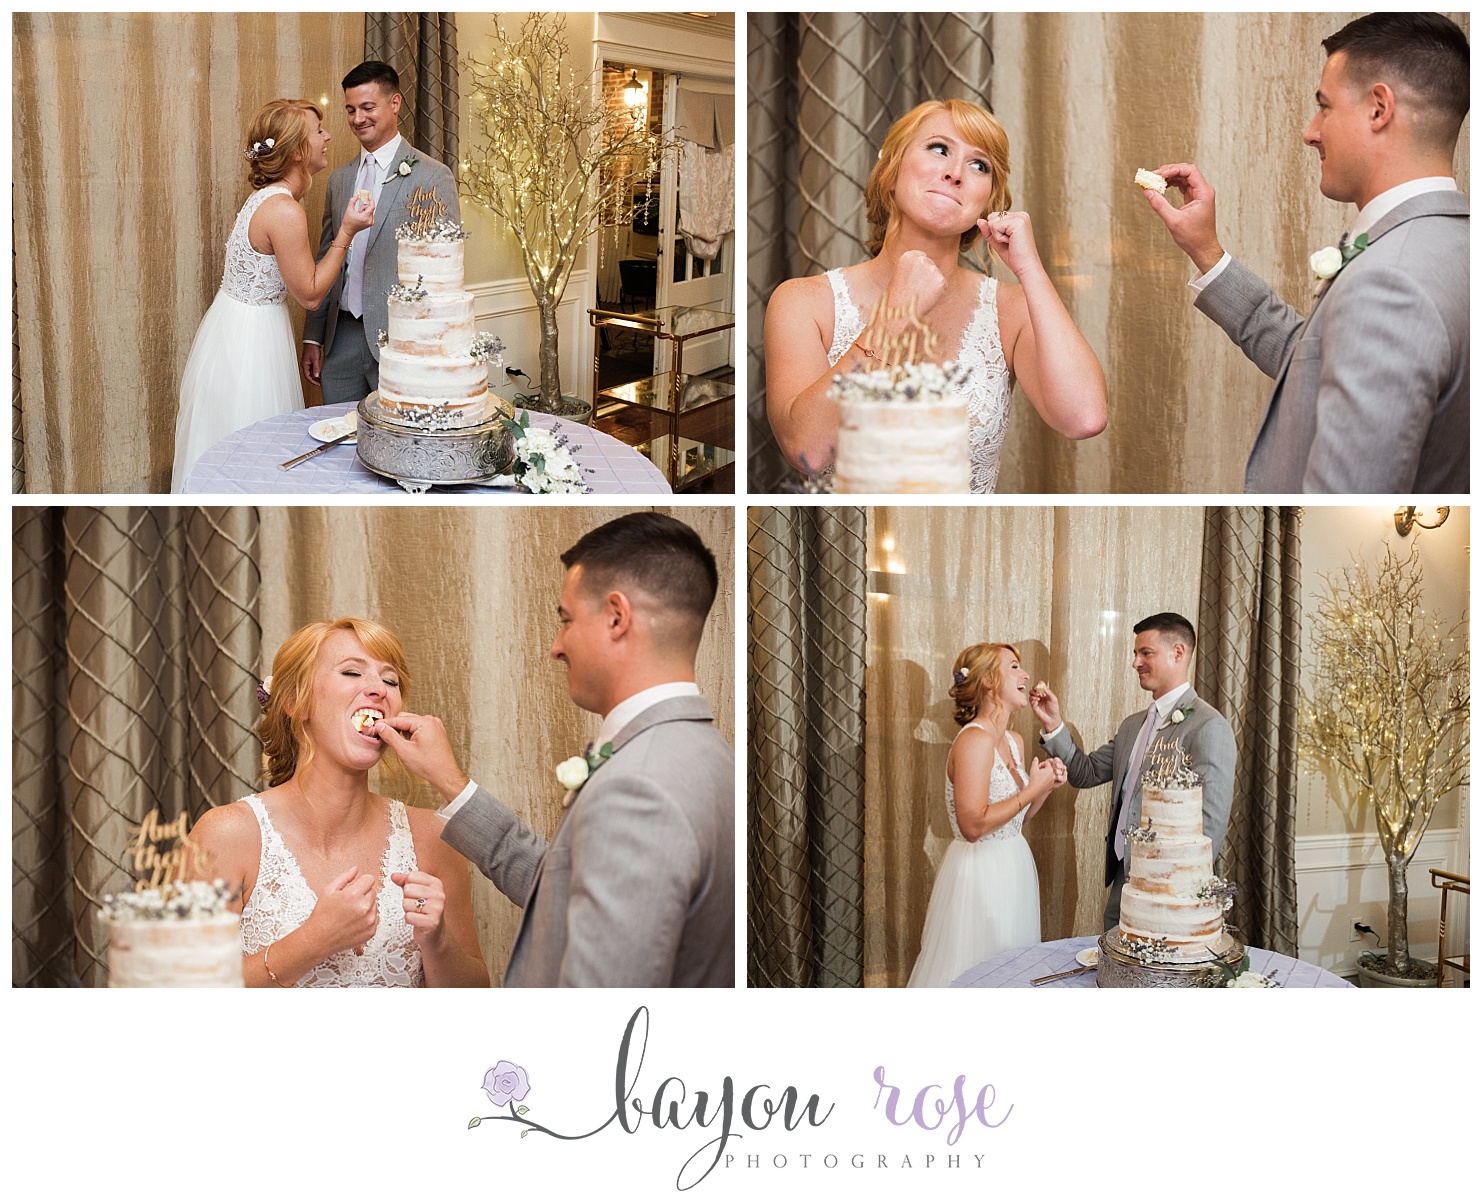 Bride threatens groom playfully during wedding cake cutting at The Gatehouse